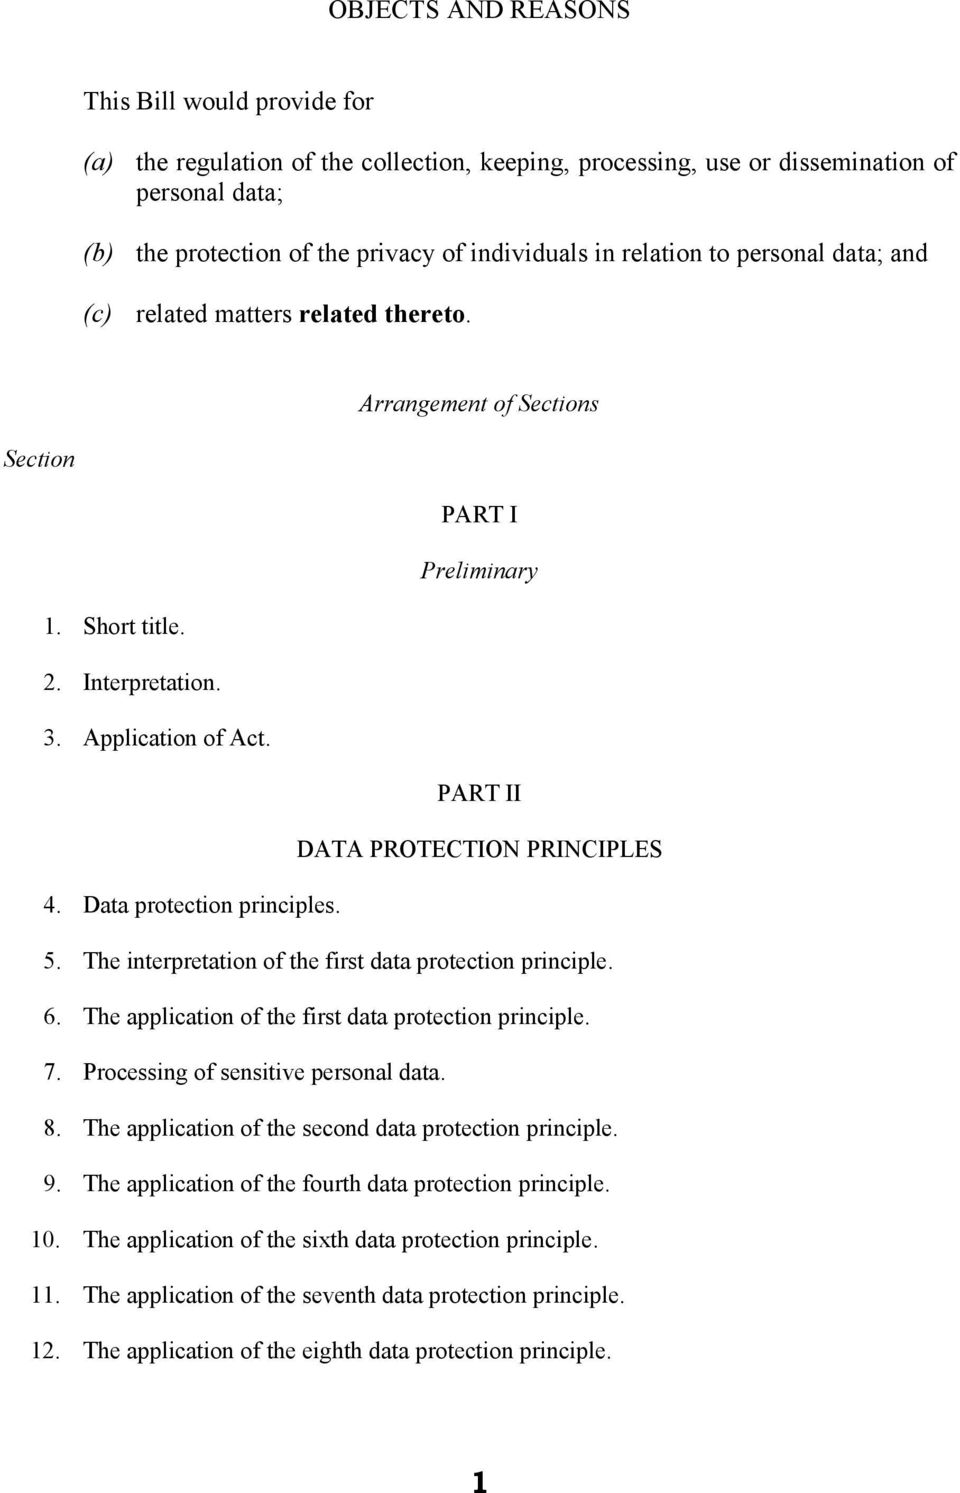 PART II DATA PROTECTION PRINCIPLES 4. Data protection principles. 5. The interpretation of the first data protection principle. 6. The application of the first data protection principle. 7.